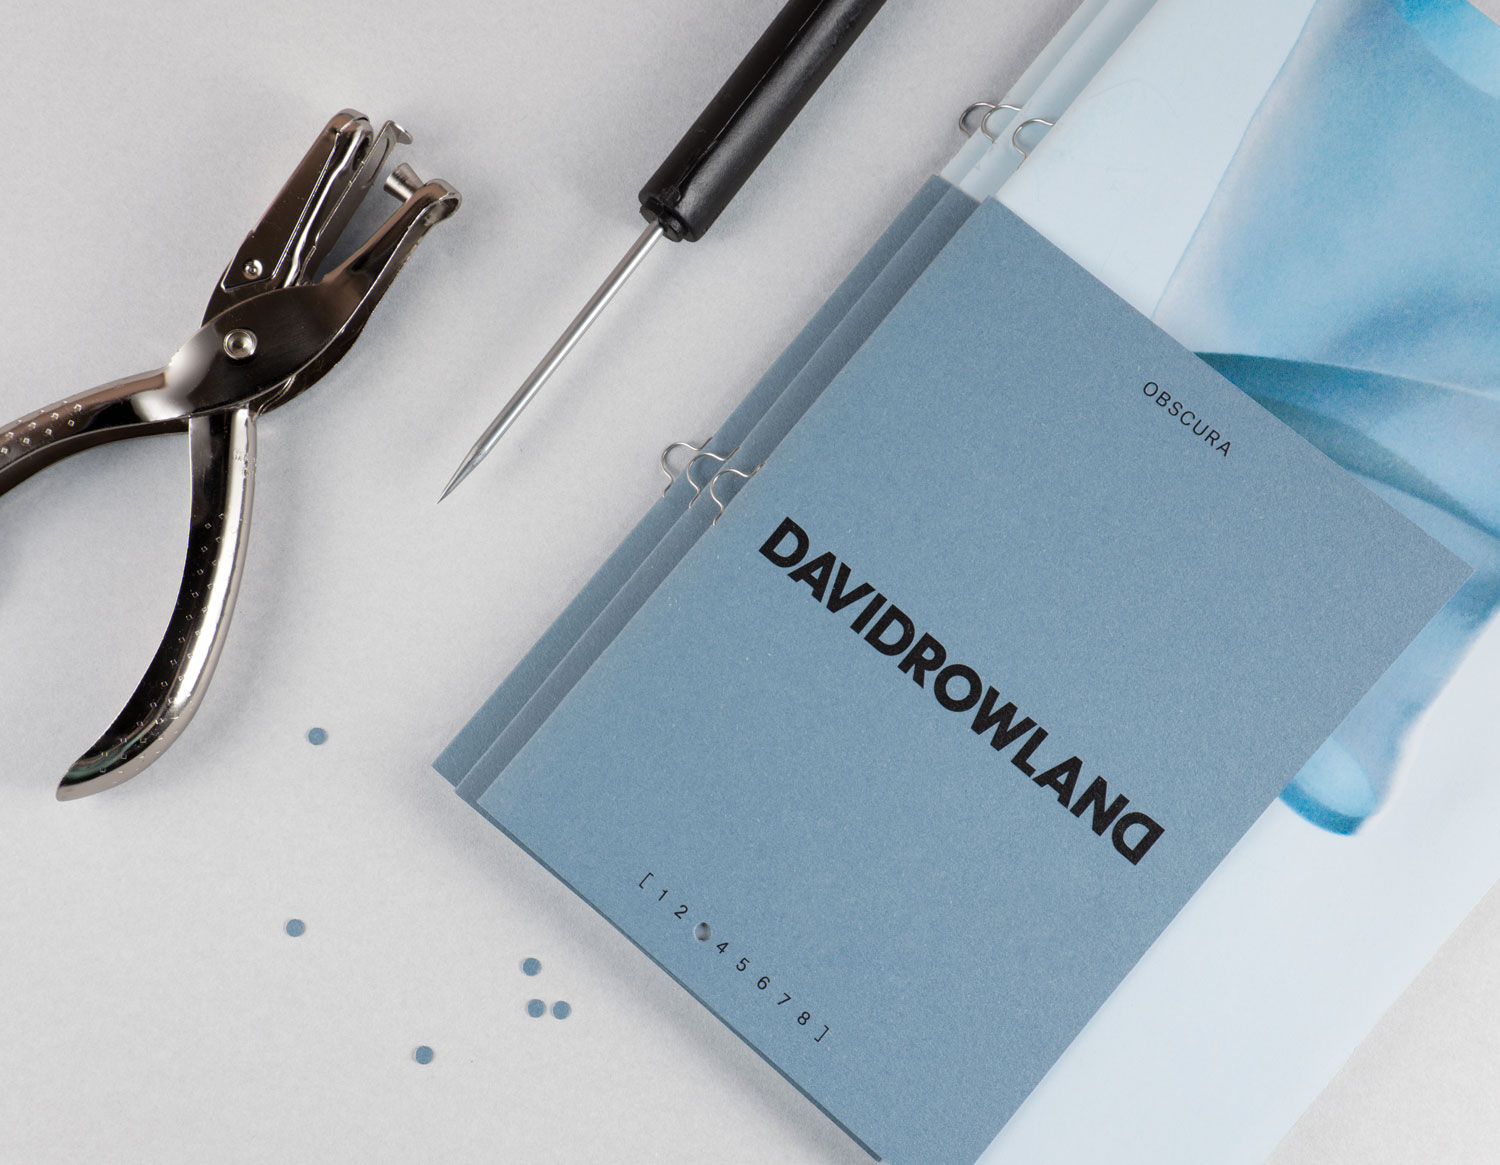 Brand identity and lookbook by London-based graphic design studio ico Design for photographer David Rowland